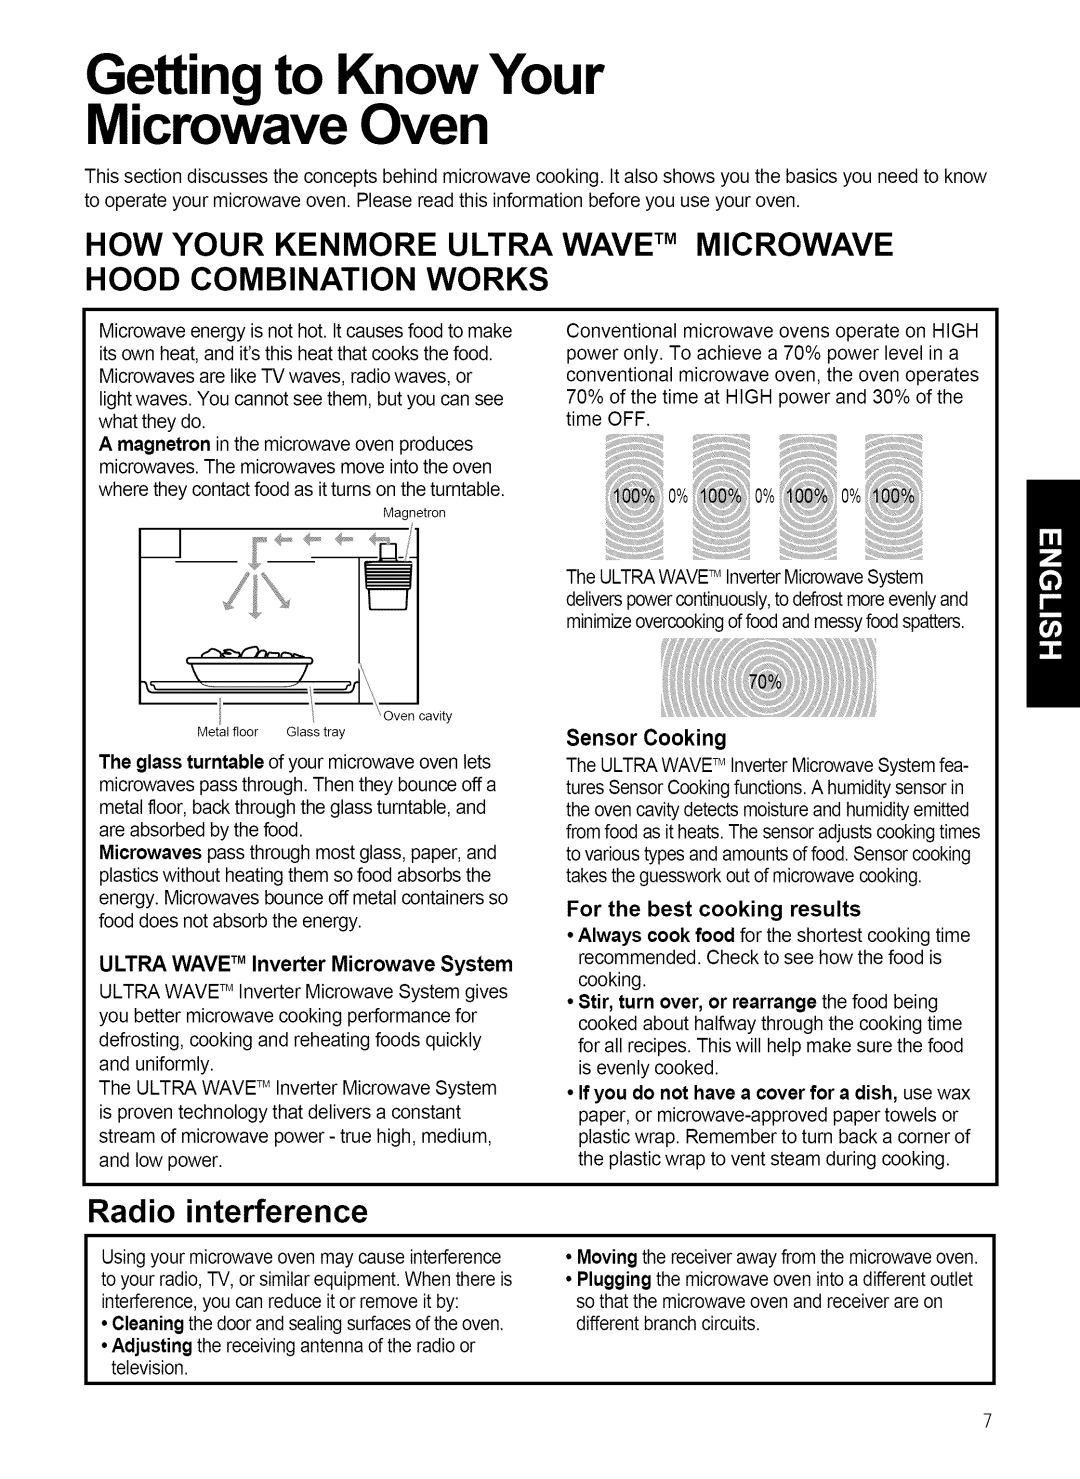 Kenmore 721.80869, 721.80864, 721.80863, 721.80862 Getting to Know Your Microwave Oven, Radio interference, Sensor Cooking 